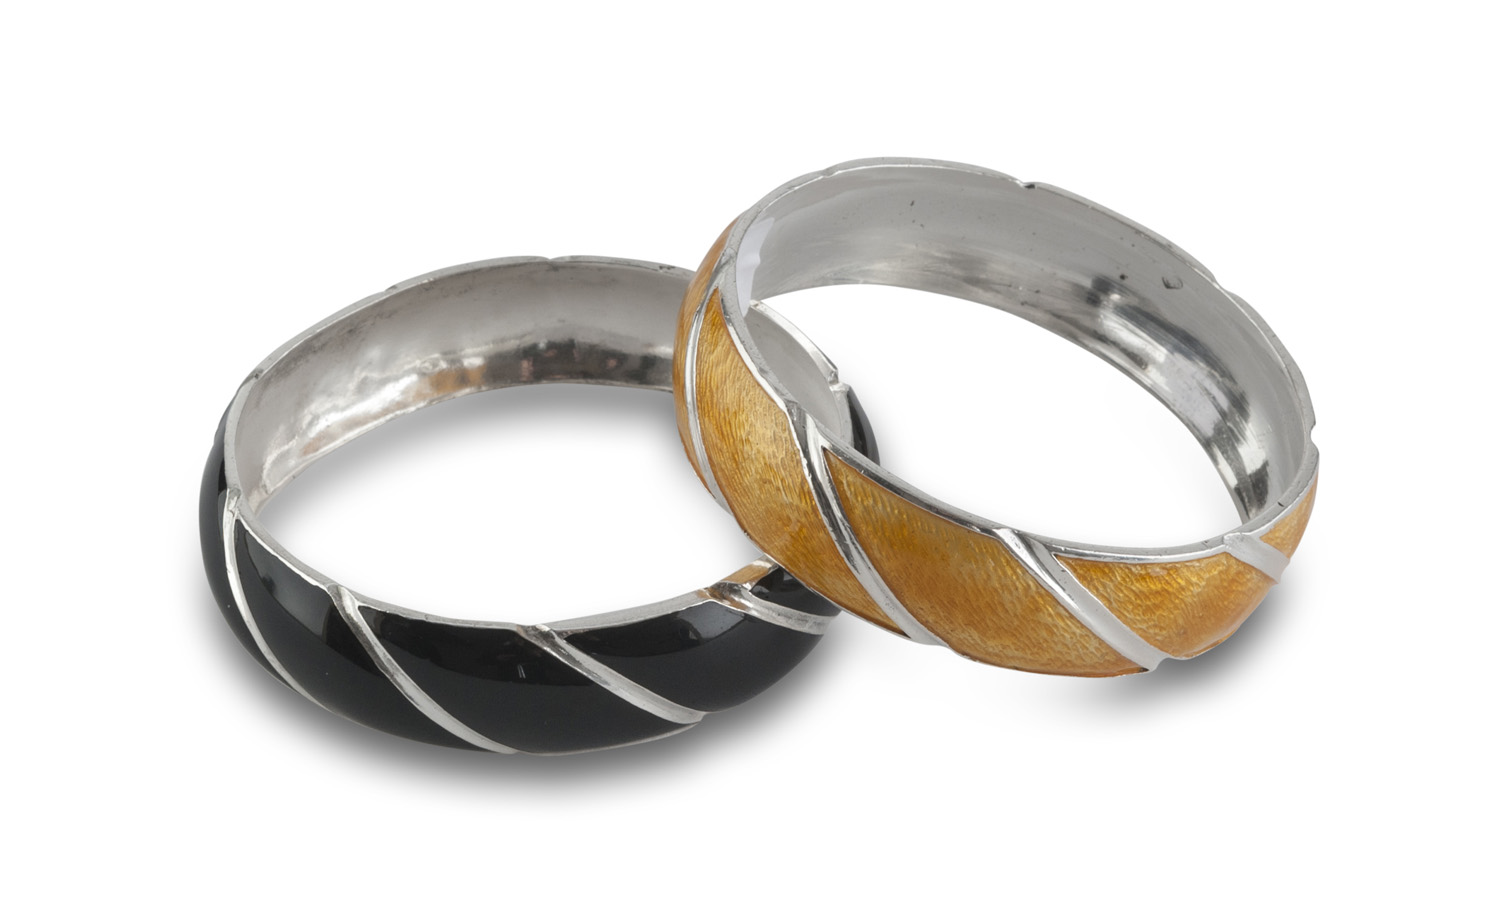 TWO RIGID BRACELETS in silver and enamel on black ground and yellow. Punch Italy 20th century. Title